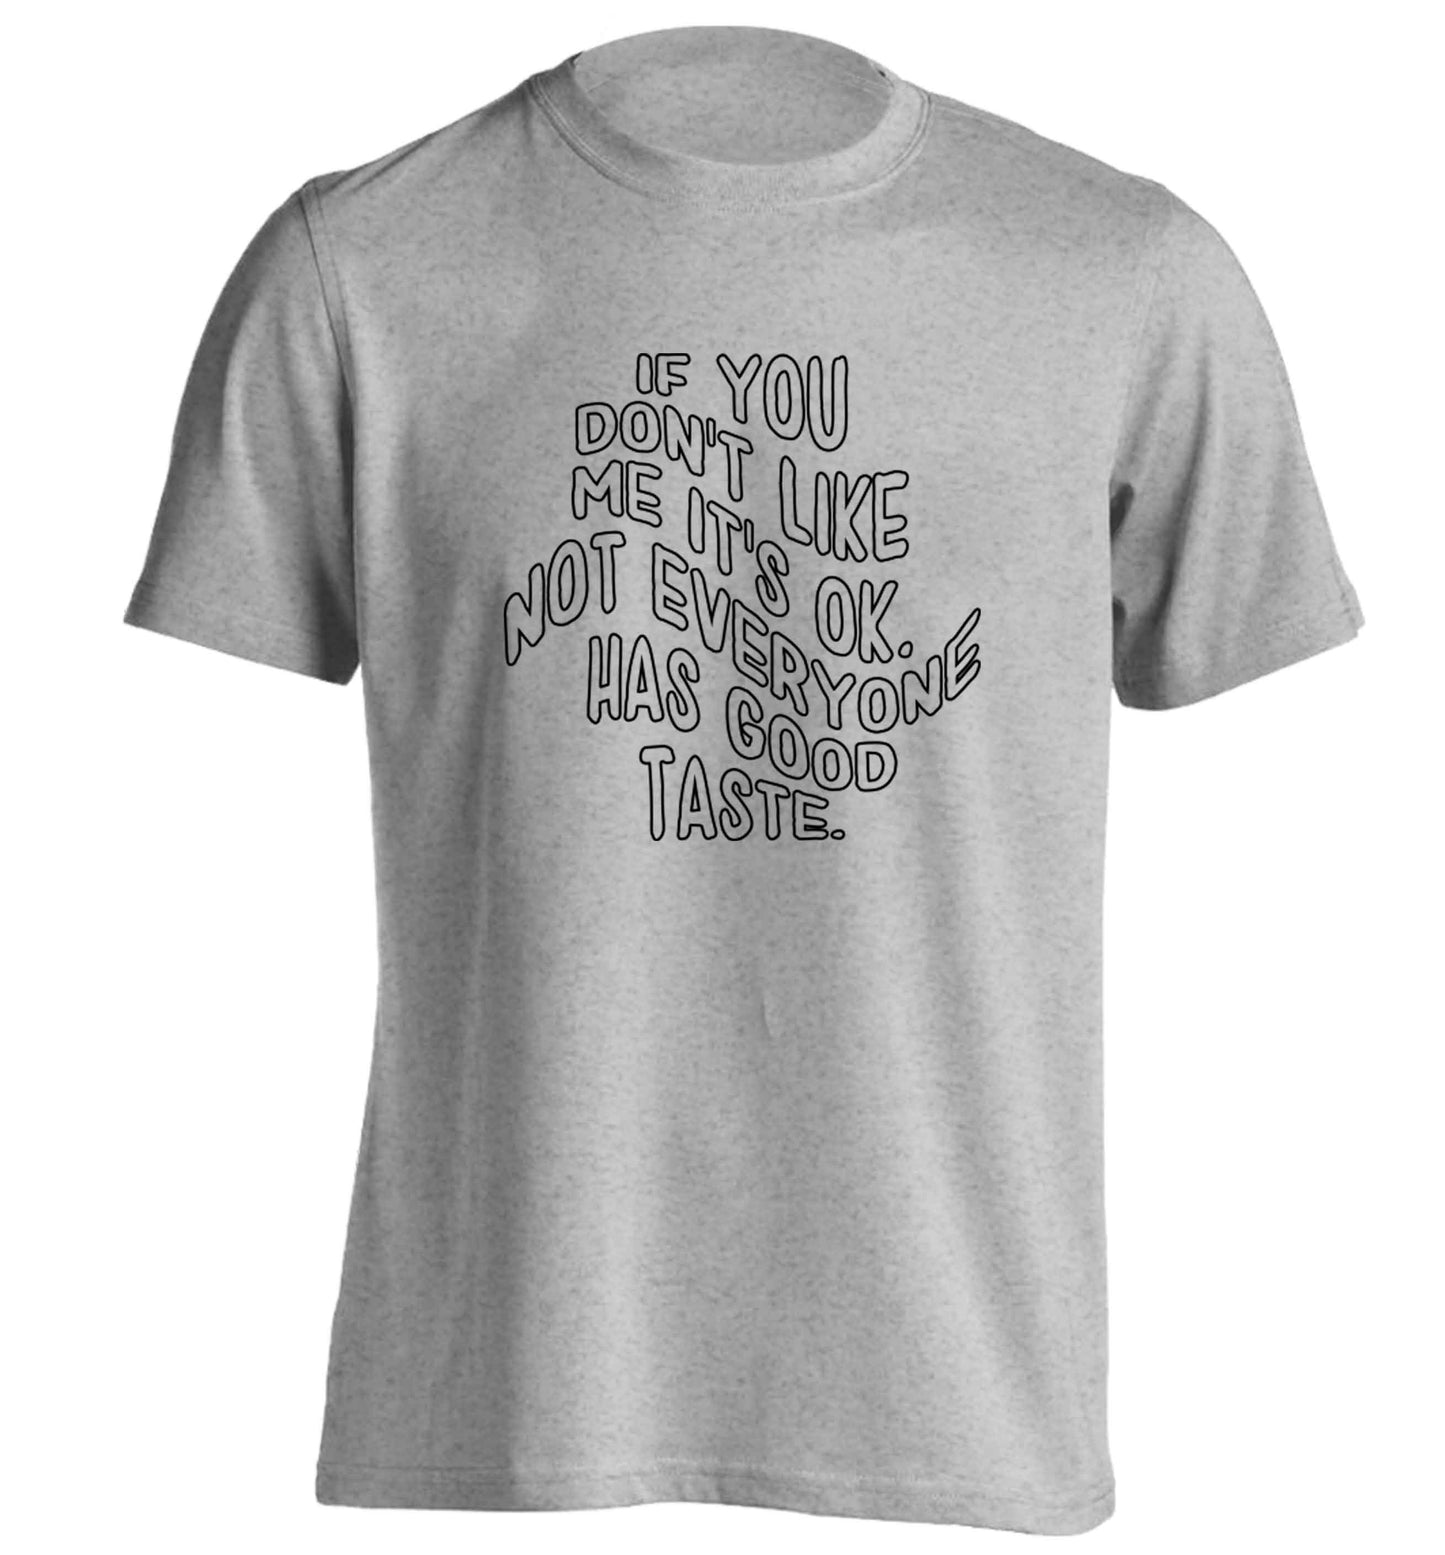 If you don't like me it's ok not everyone has good taste adults unisex grey Tshirt 2XL